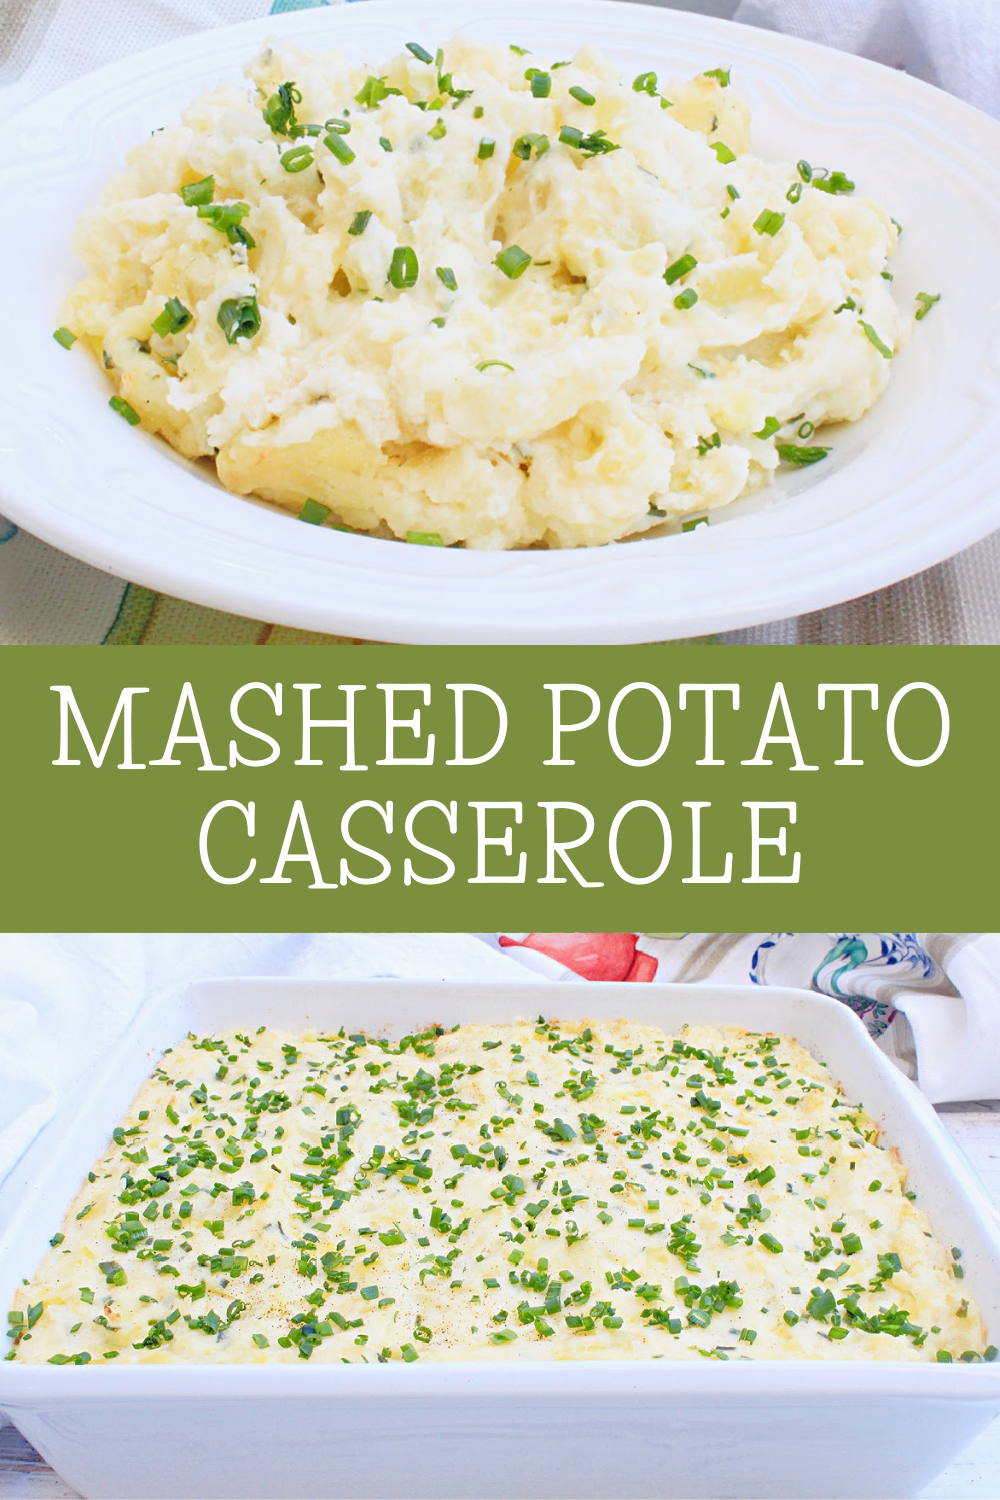 Mashed Potato Casserole ~ A hearty and rustic potato casserole inspired by traditional Irish flavors! Perfect for St. Patrick's Day! via @thiswifecooks